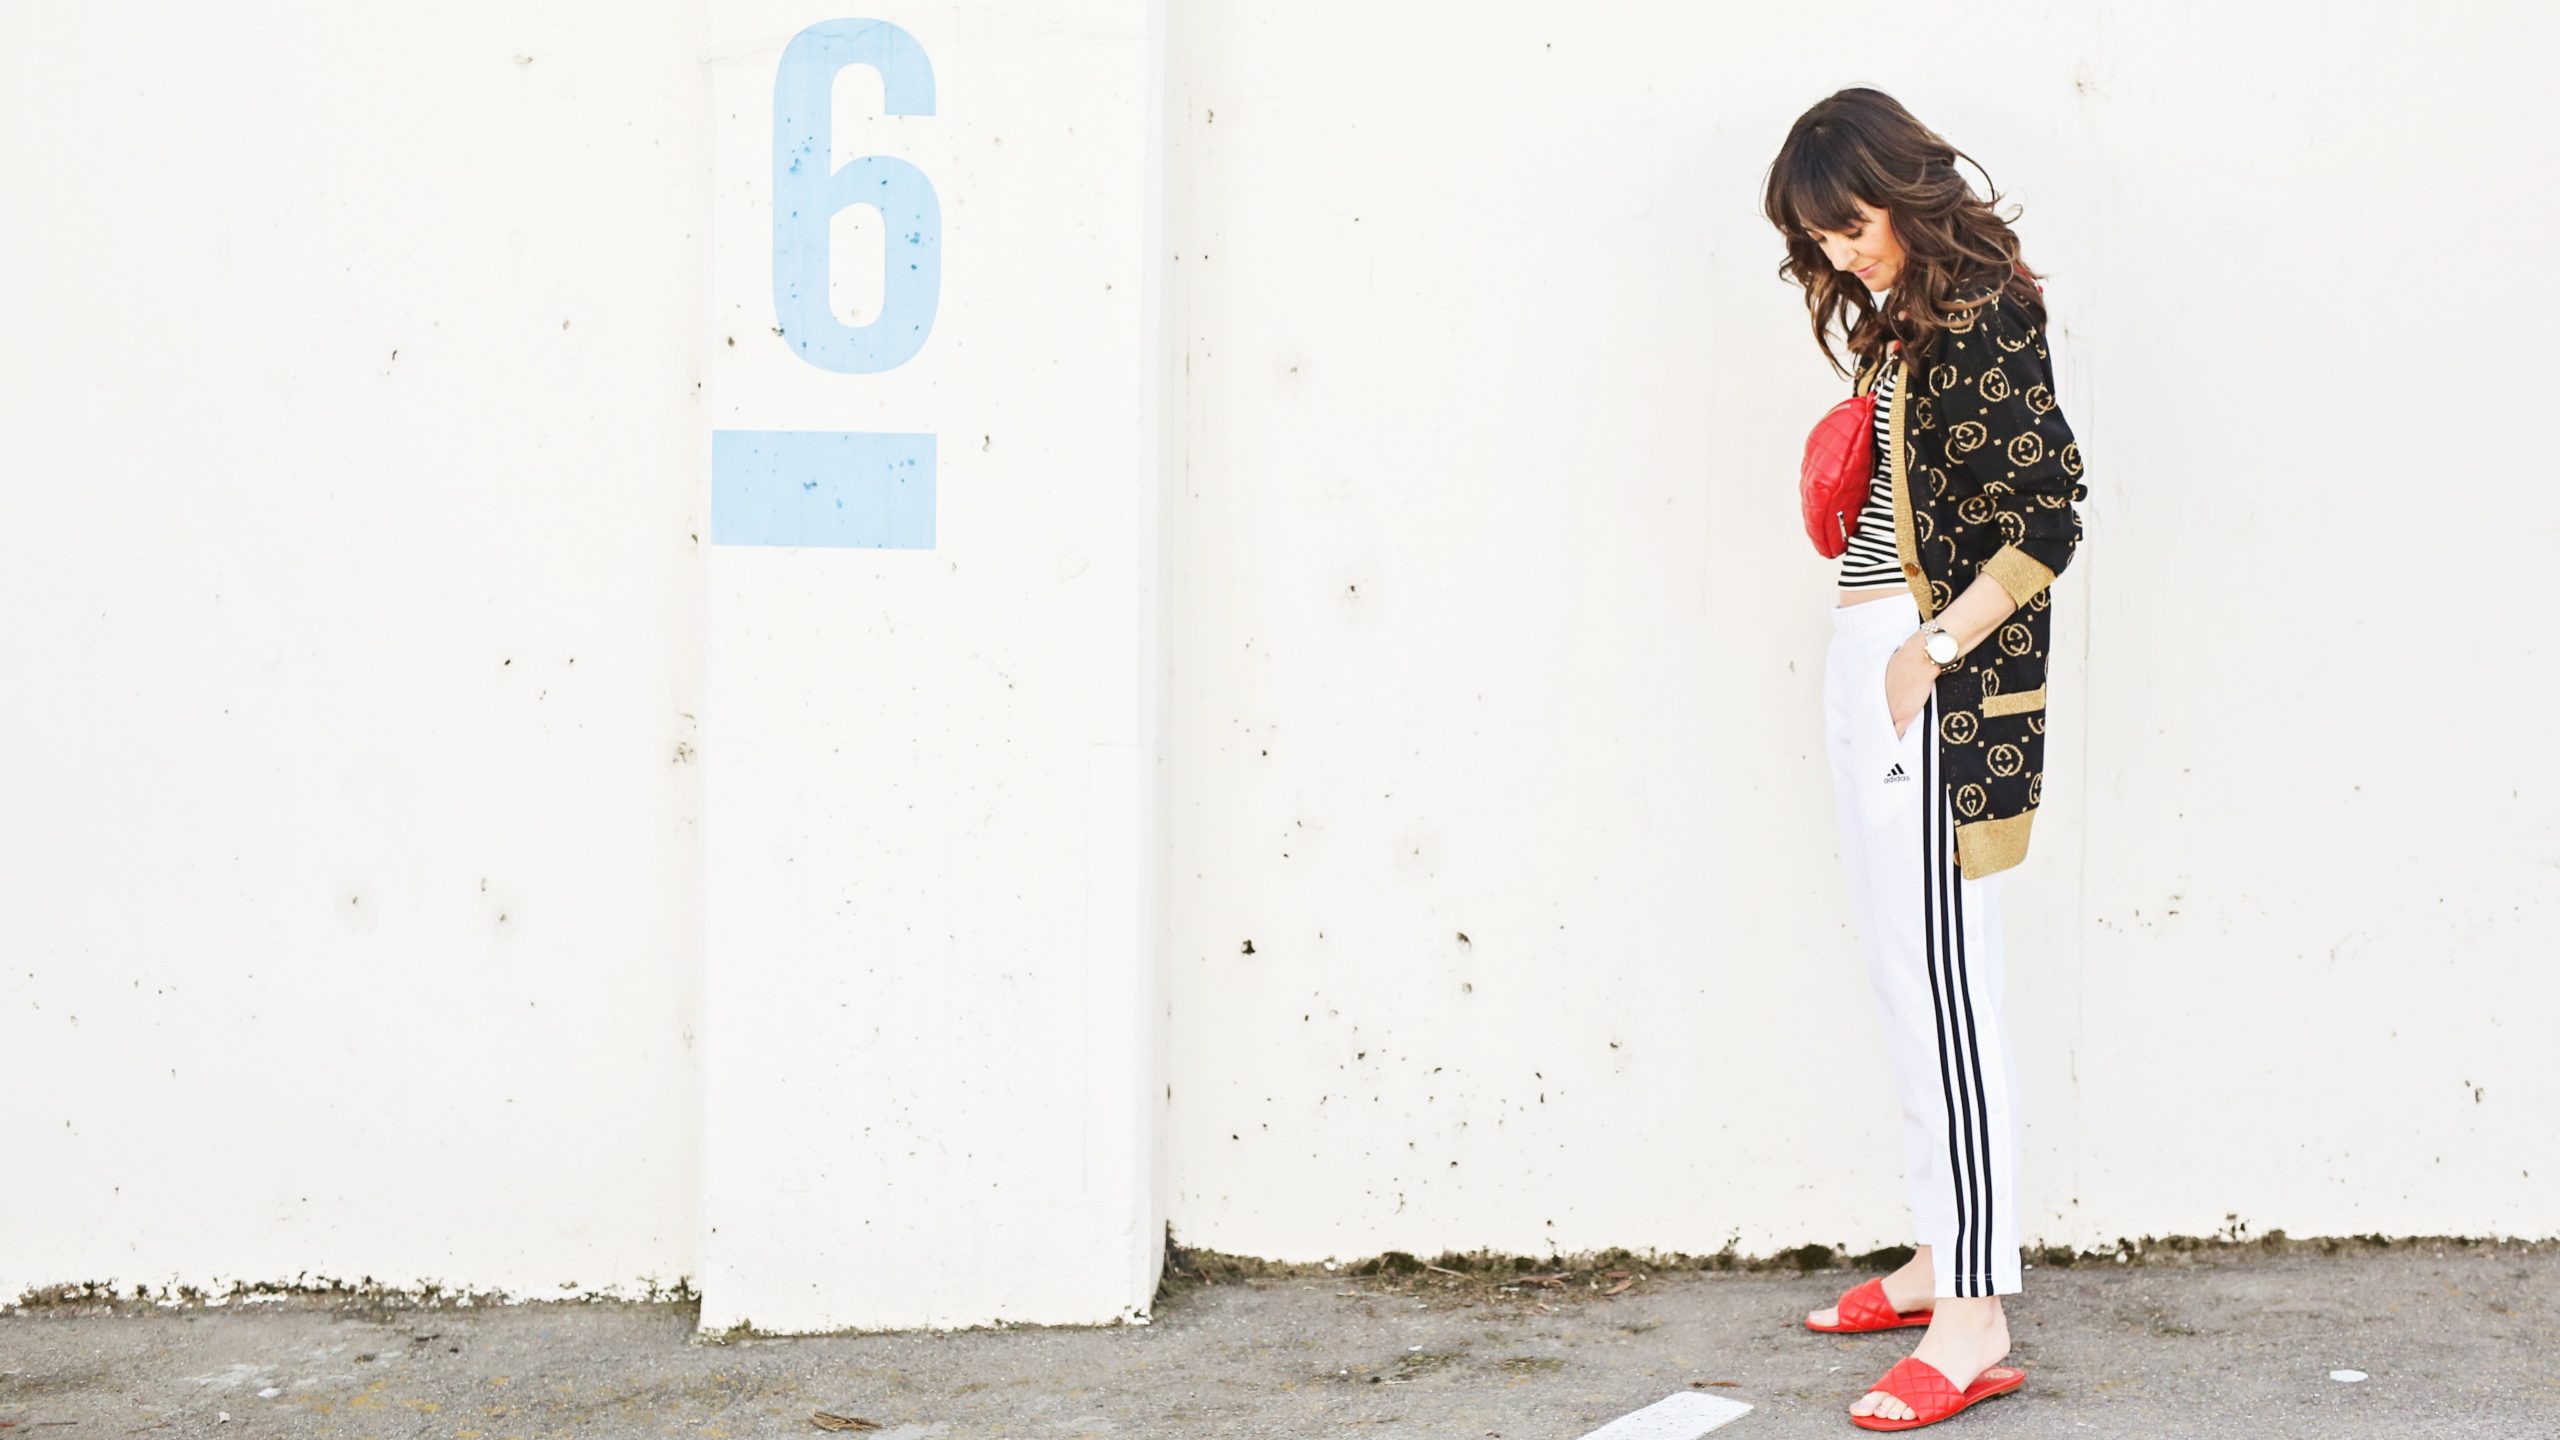 Jennifer Sattler Stylist street style track pant outfit Sacramento Ca red flat quilted sandals black and whtie addias track pants black and gold gucci cardigan black and white tank top red belt bag red cross body bag